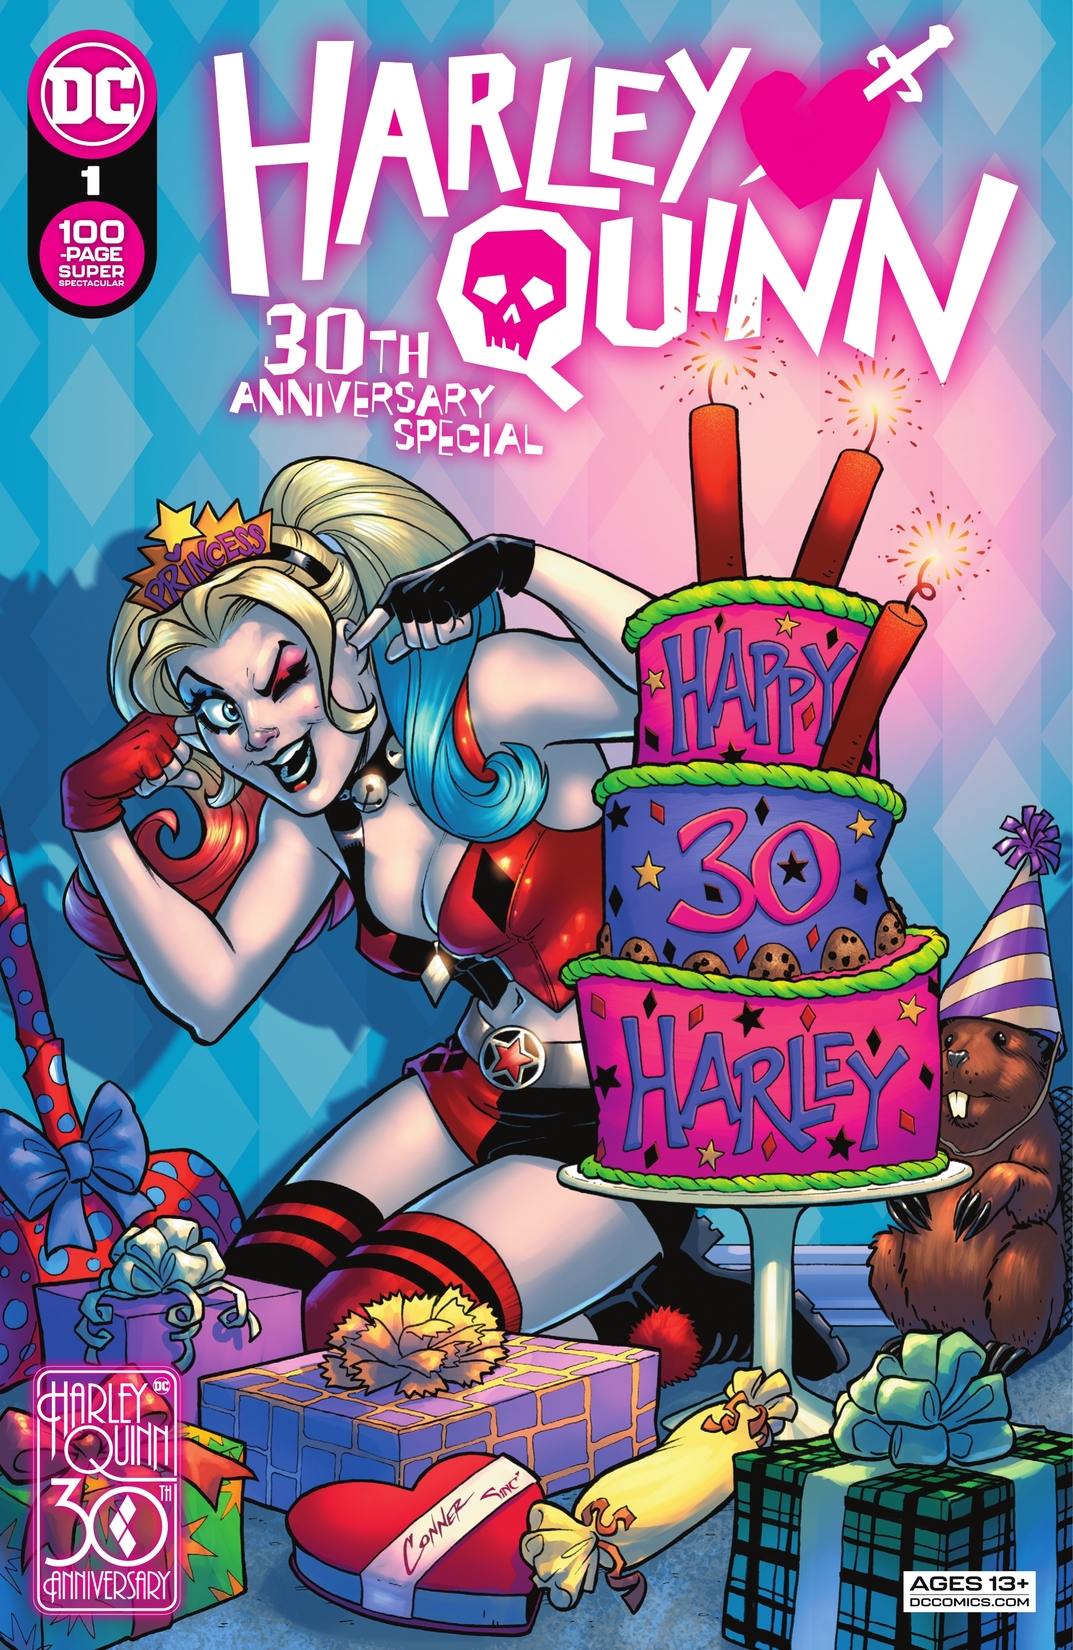 Harley Quinn 30th Anniversary Special #1 preview images